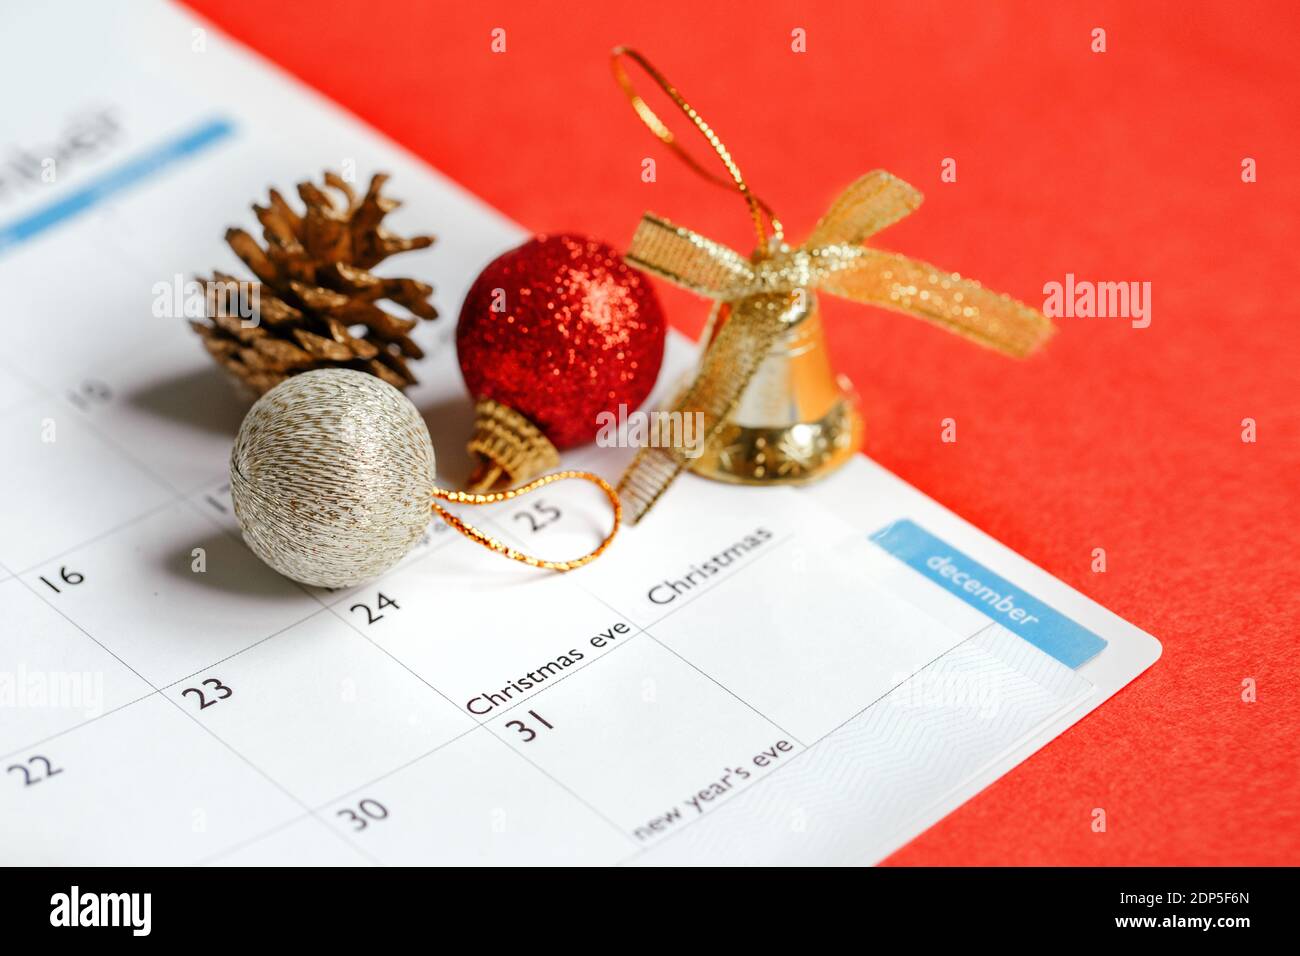 Page of planner calendar opened on December 24 Christmas holiday. Flat lay calendar with New Year or Christmas festive ornaments, toys, pine cone. Stock Photo